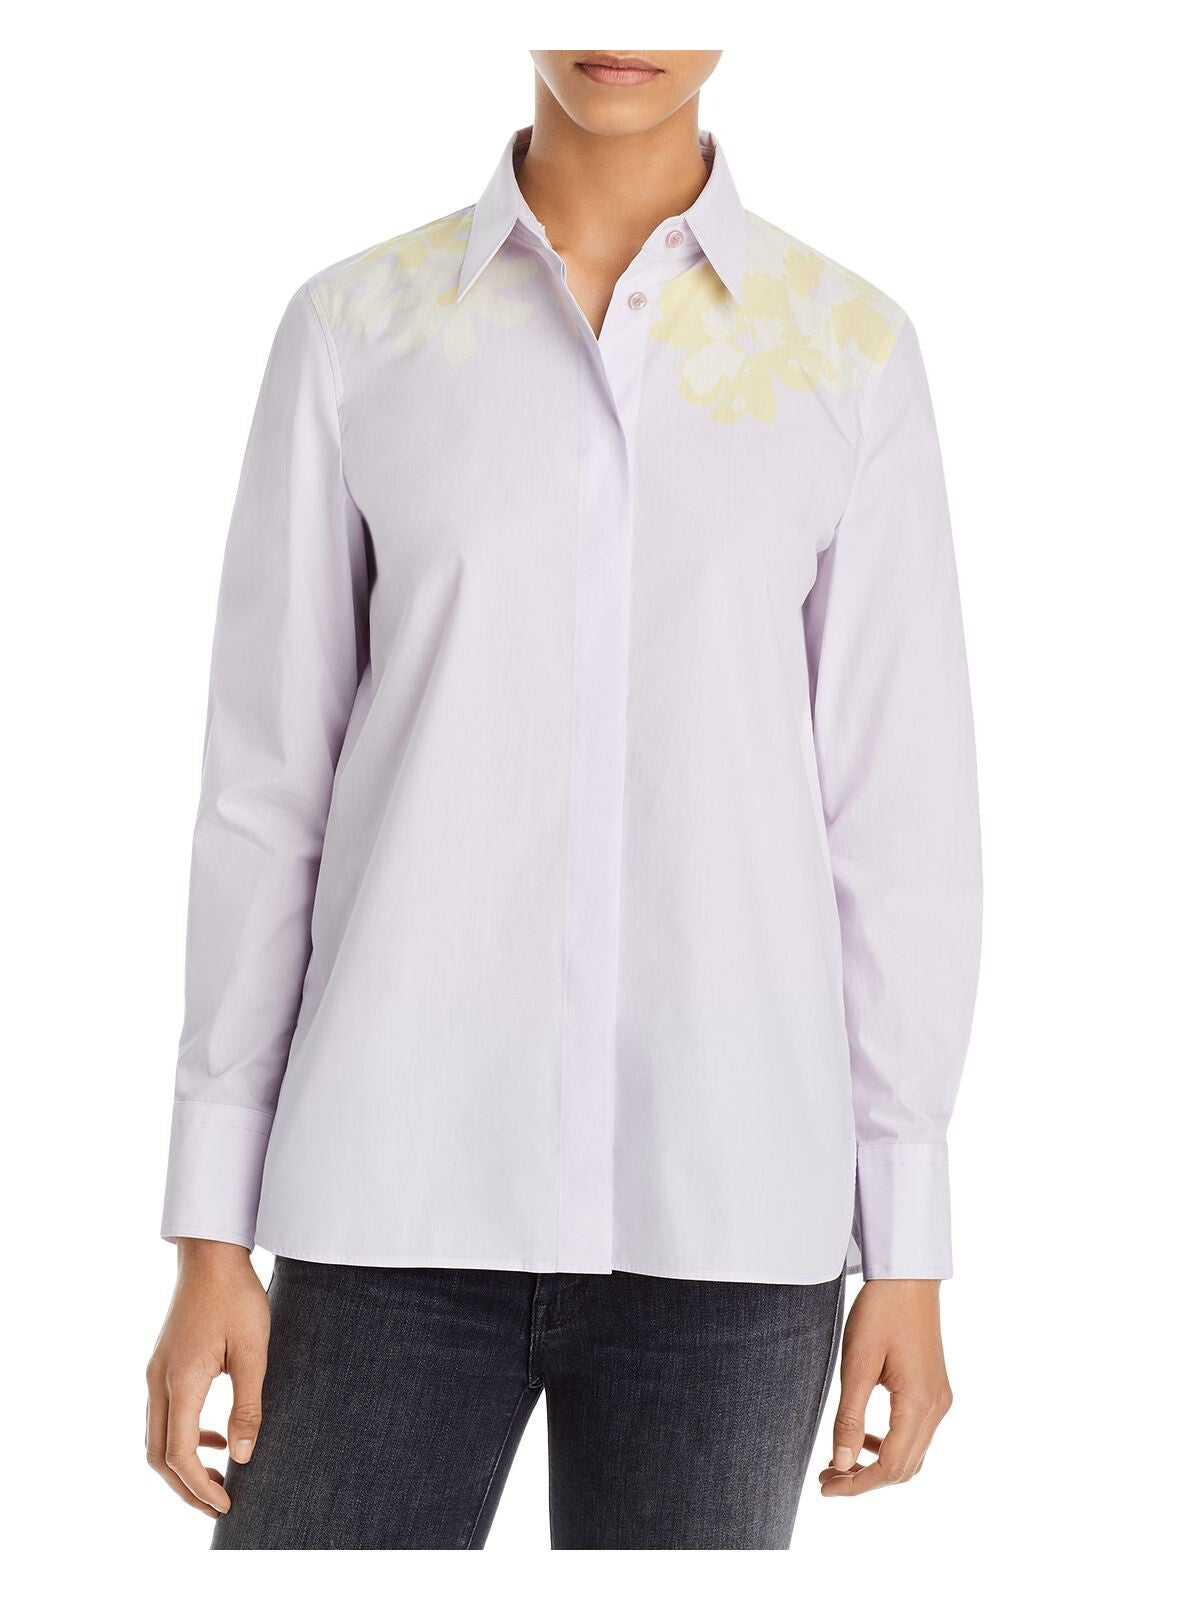 ST JOHN Womens Purple Pleated Floral Cuffed Sleeve Collared Button Up Top M